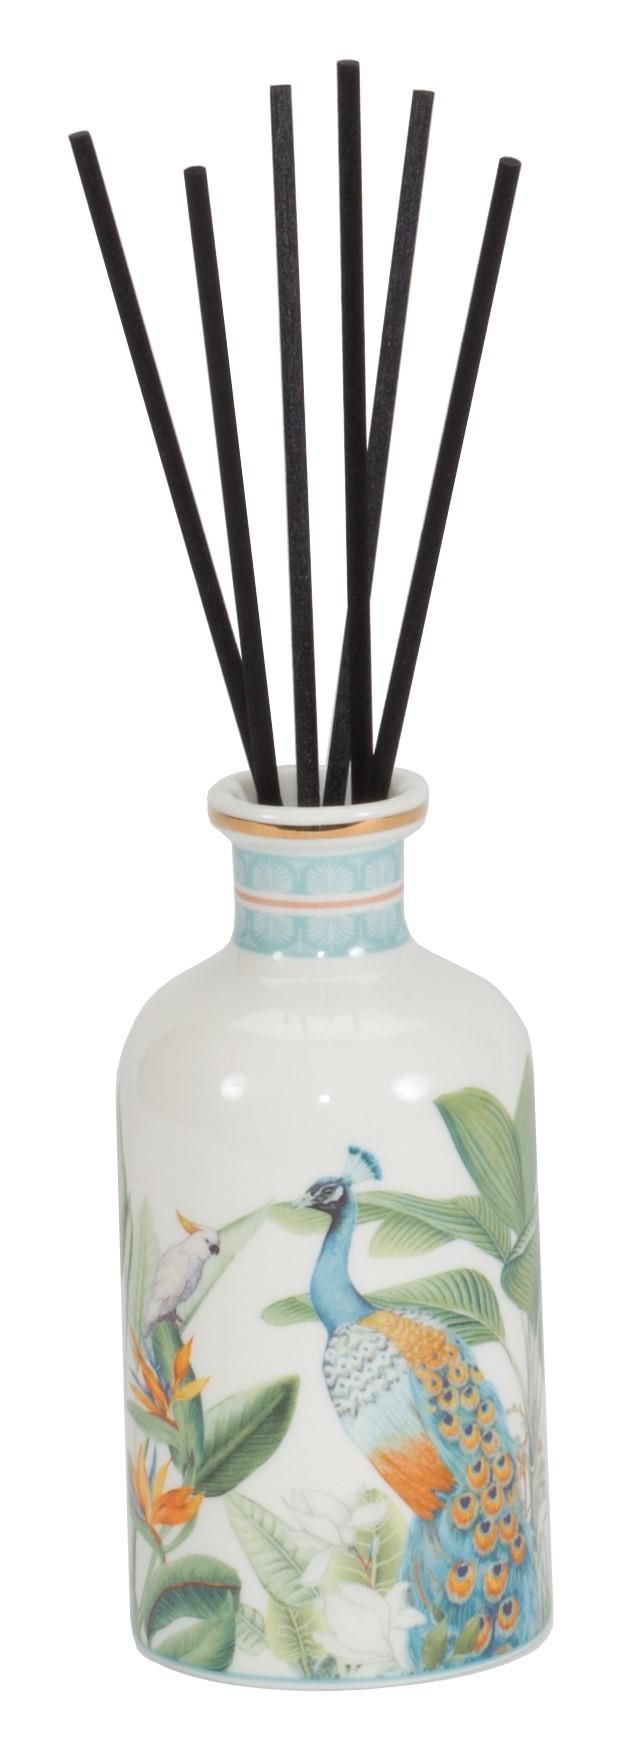 Tropical Collection Diffuser 2 Pack